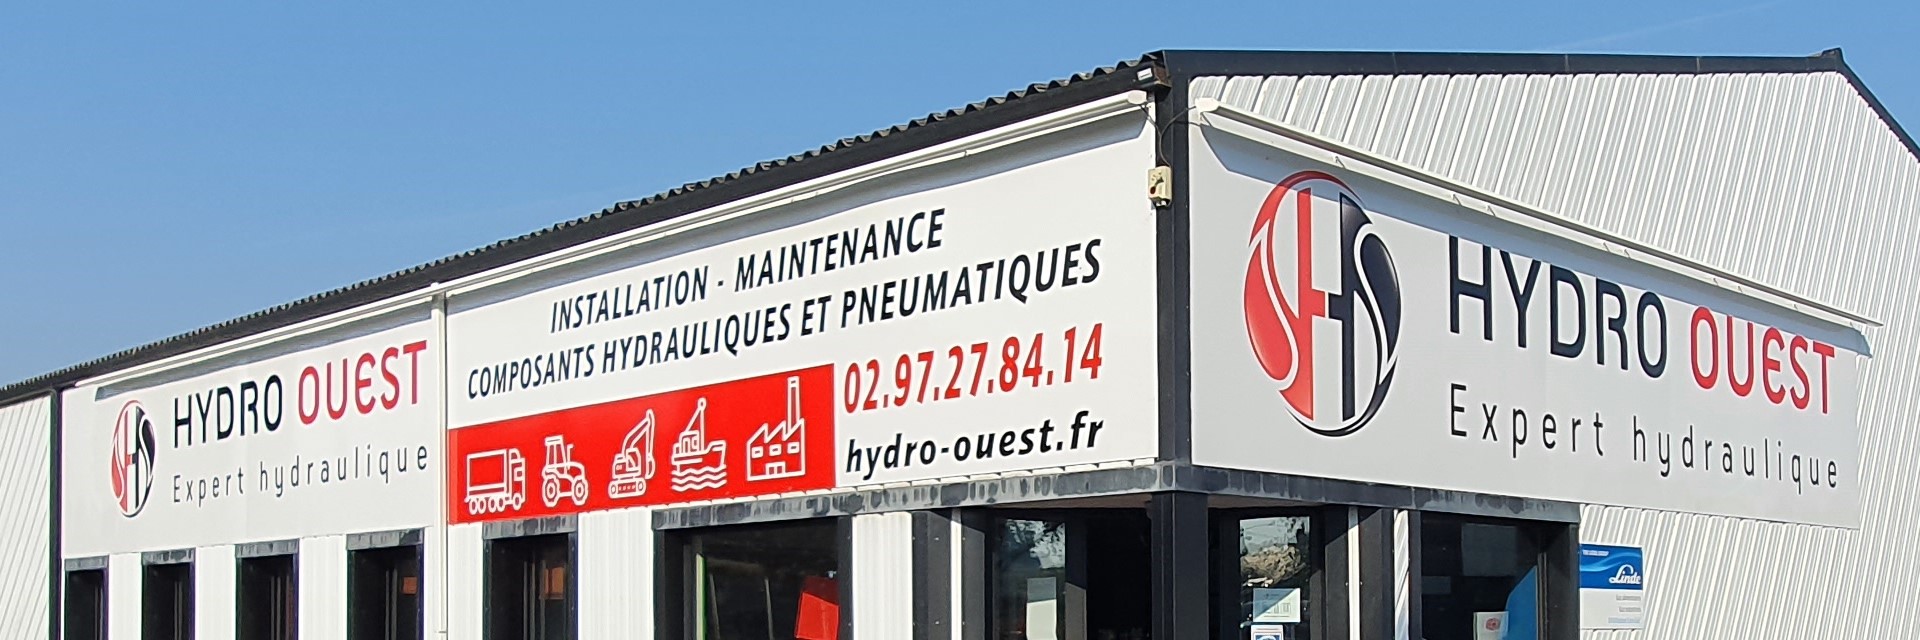 HYDRO OUEST